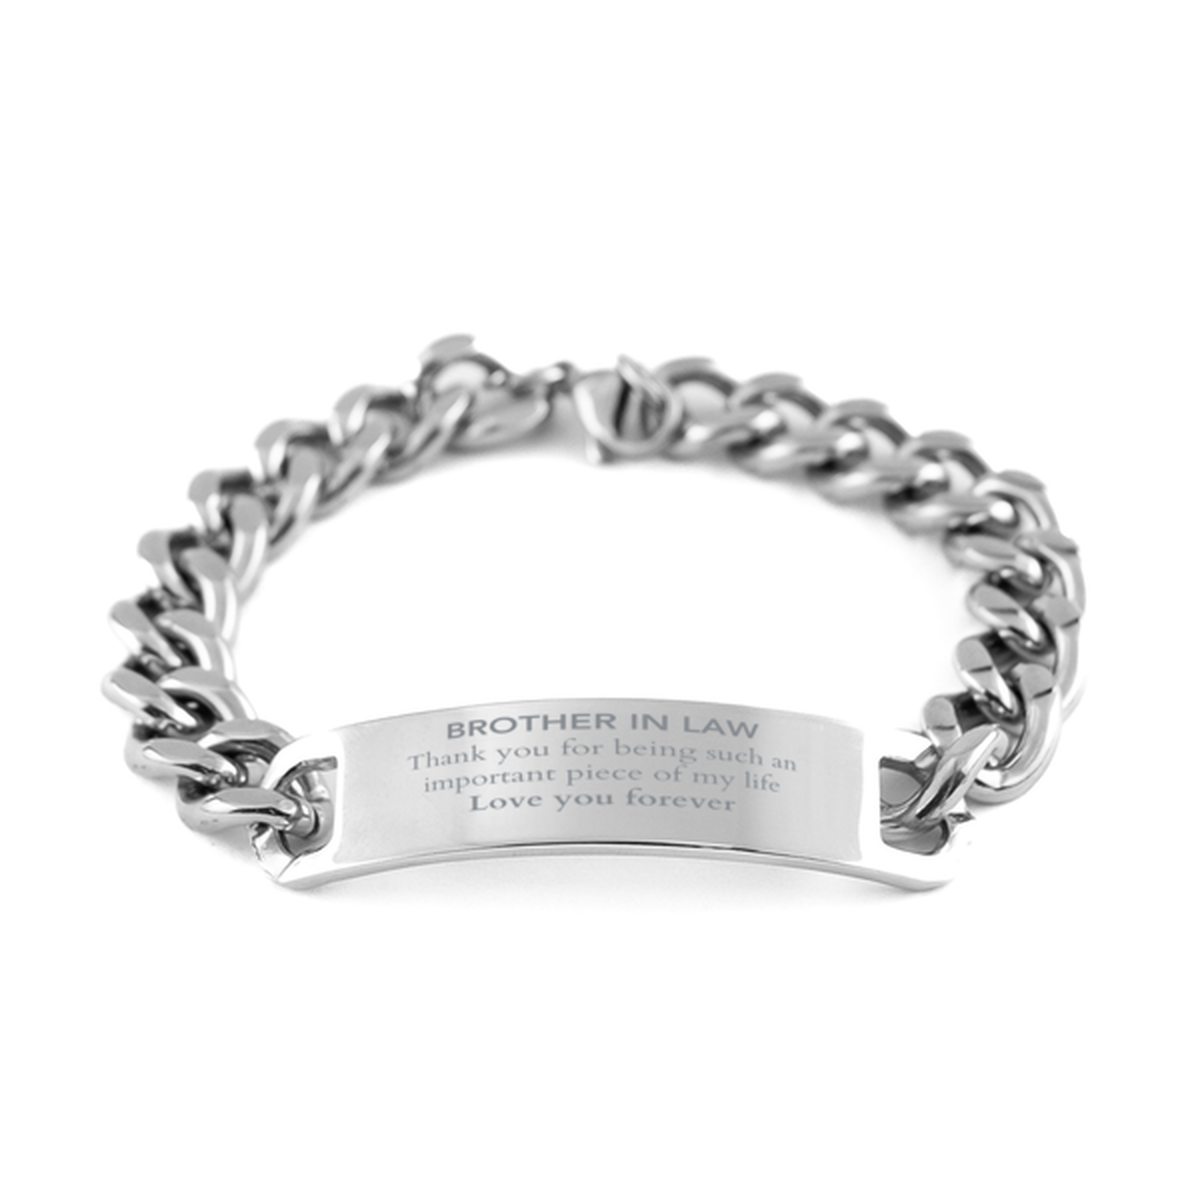 Appropriate Brother In Law Cuban Chain Stainless Steel Bracelet Epic Birthday Gifts for Brother In Law Thank you for being such an important piece of my life Brother In Law Christmas Mothers Fathers Day